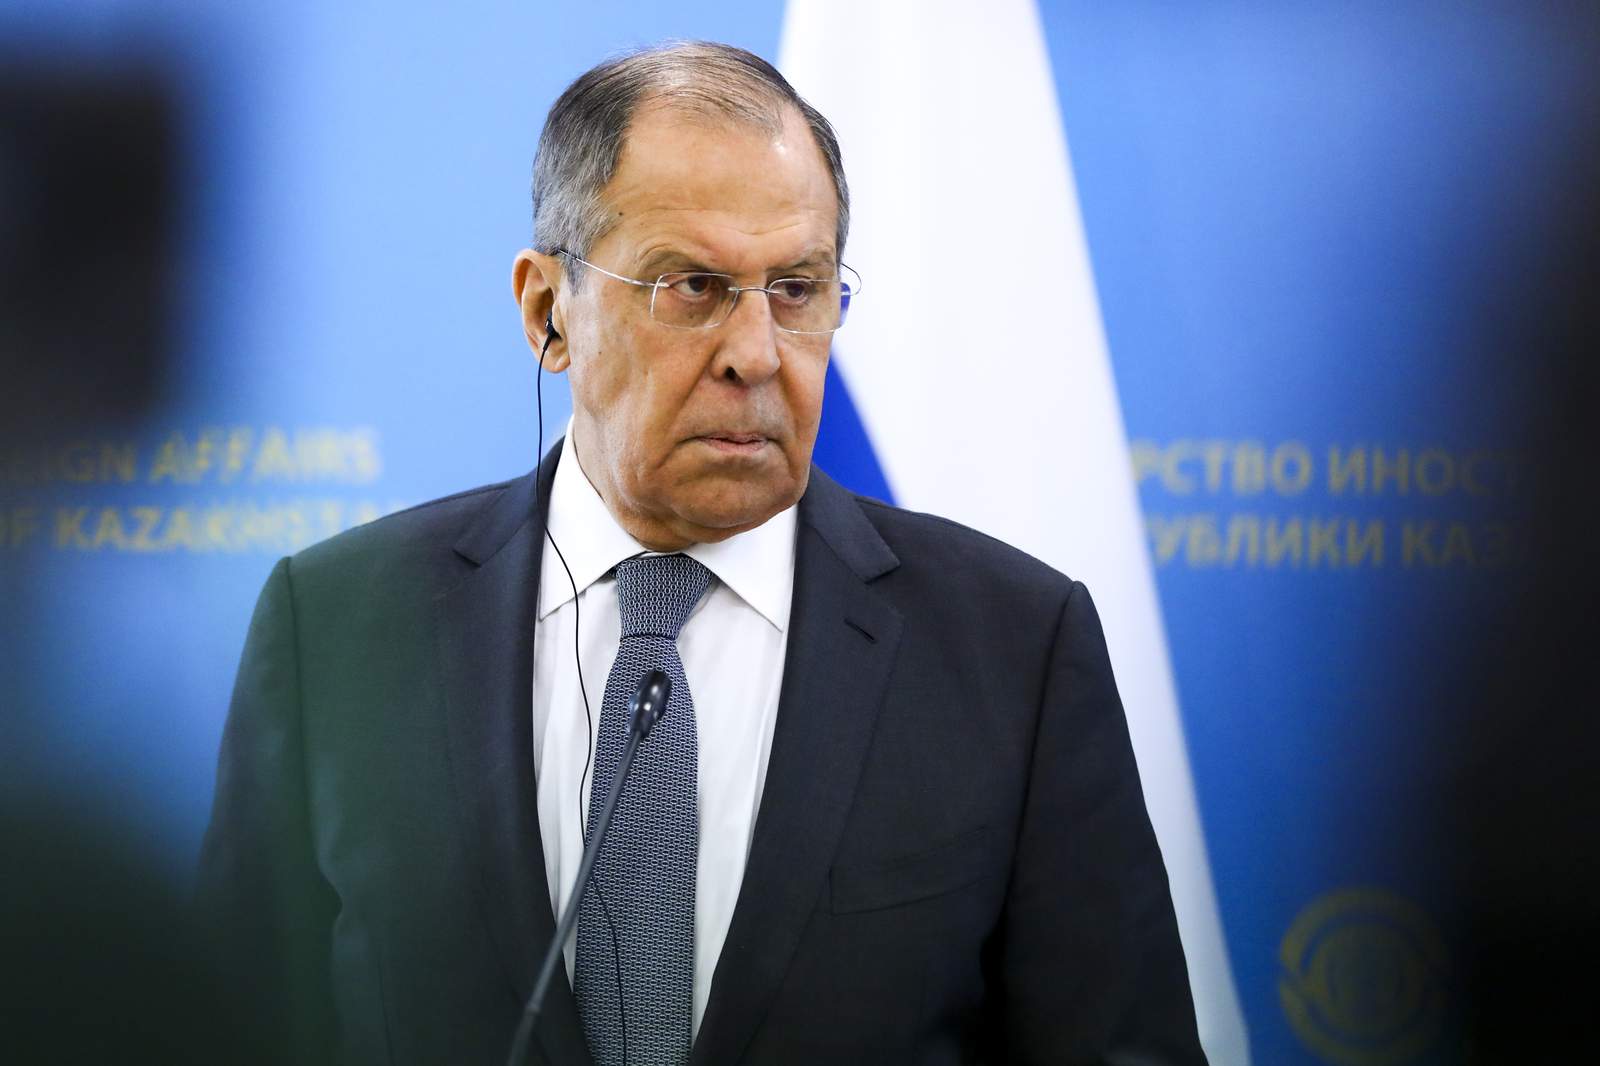 Lavrov says US policy towards Russia is 'dumb,' ineffective